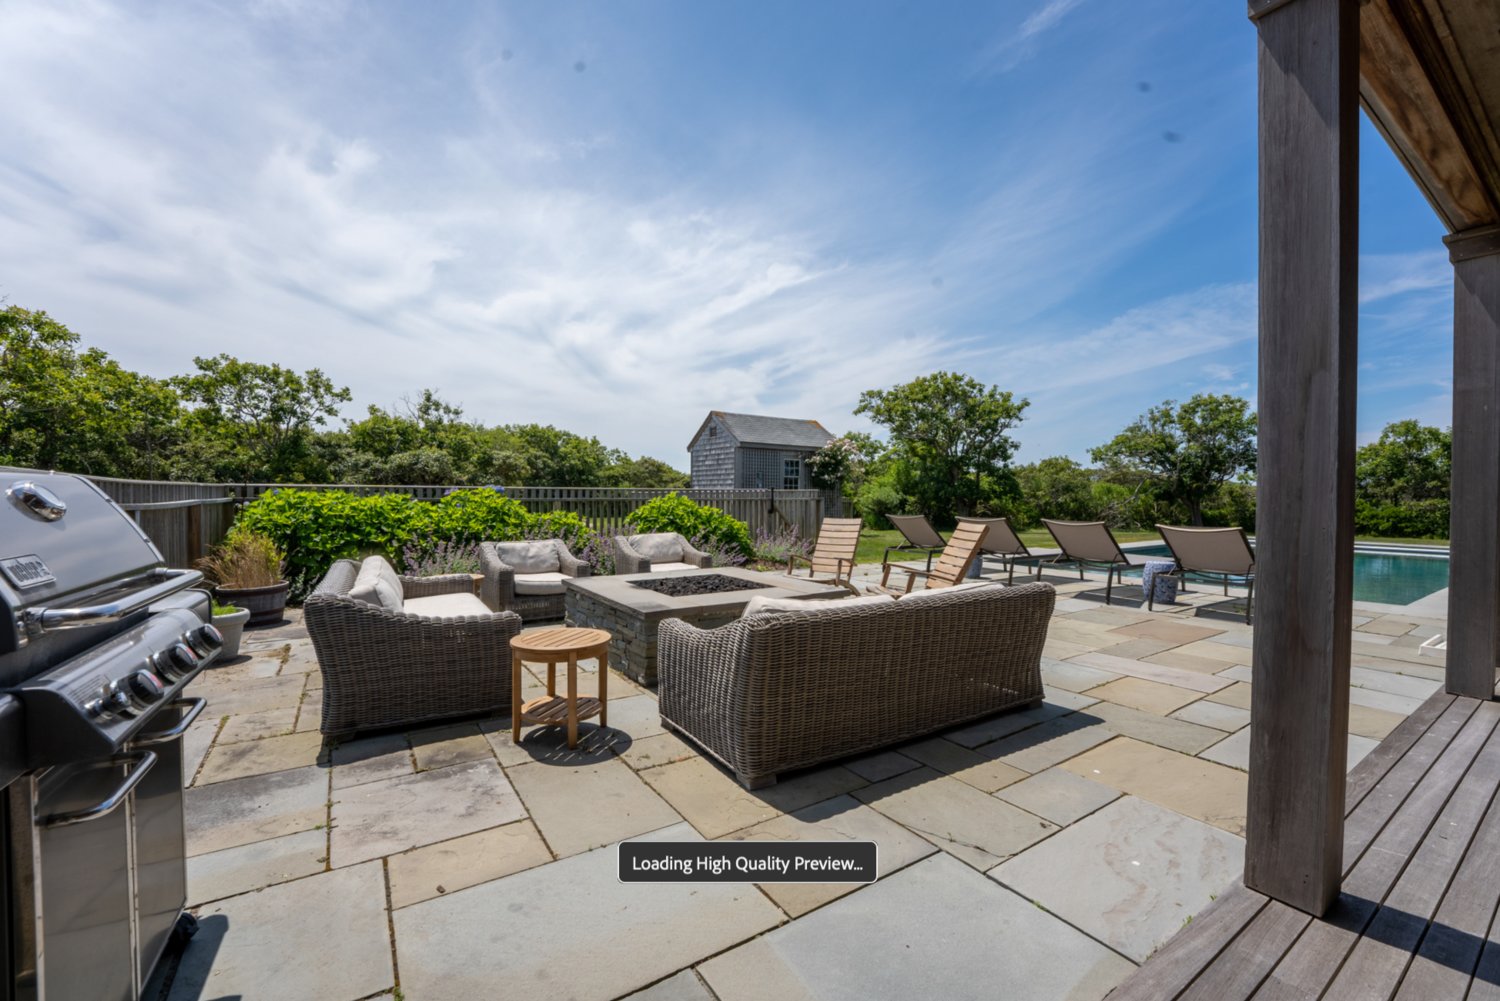 The bluestone patio is the perfect location for pool-side entertaining.